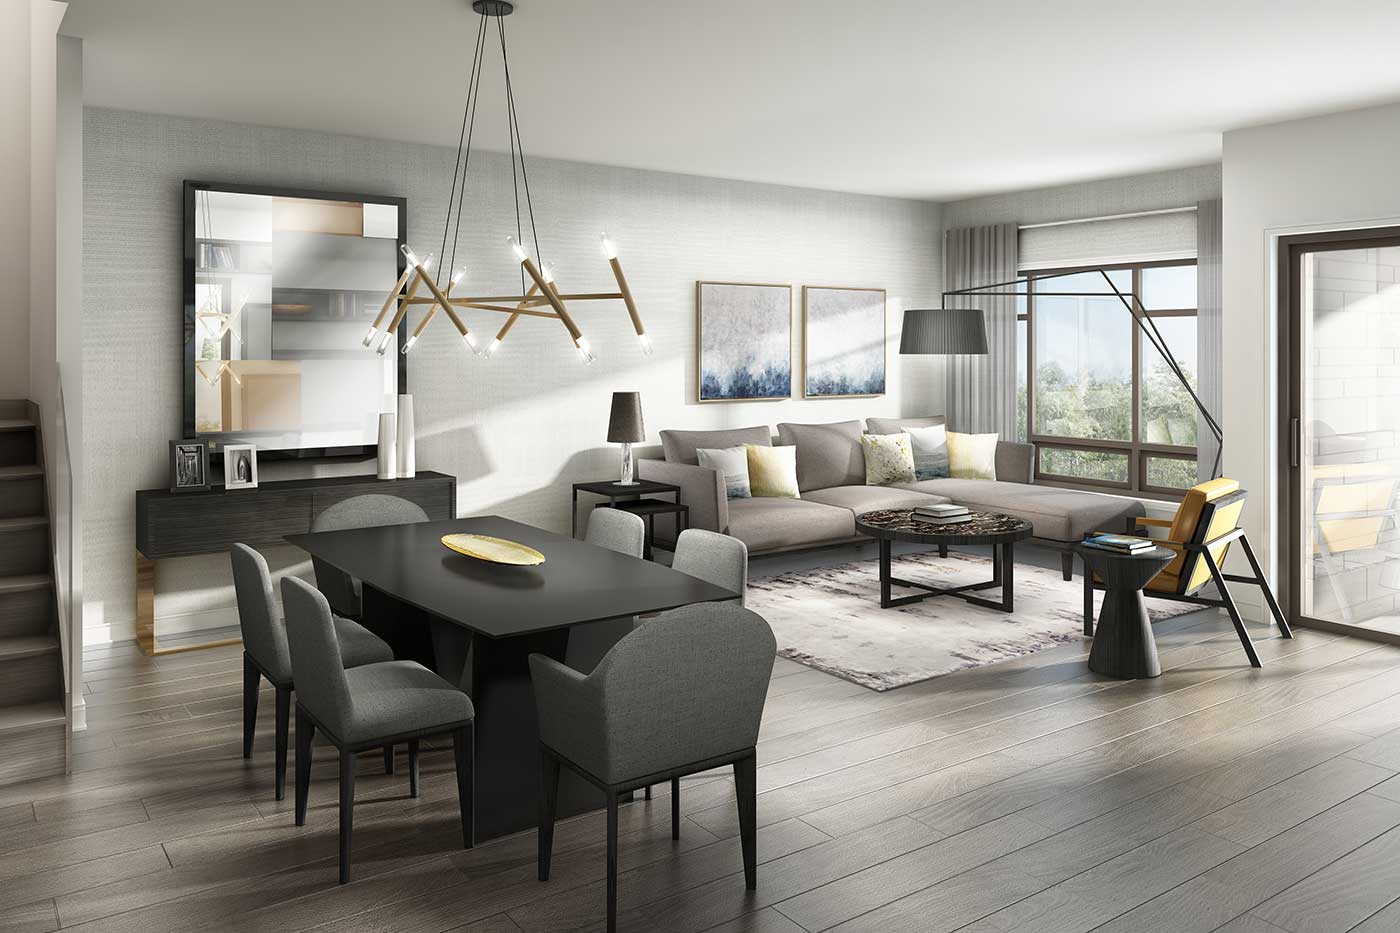 burlington-townhomes-station-west-condos-london-collection-living-room.jpg